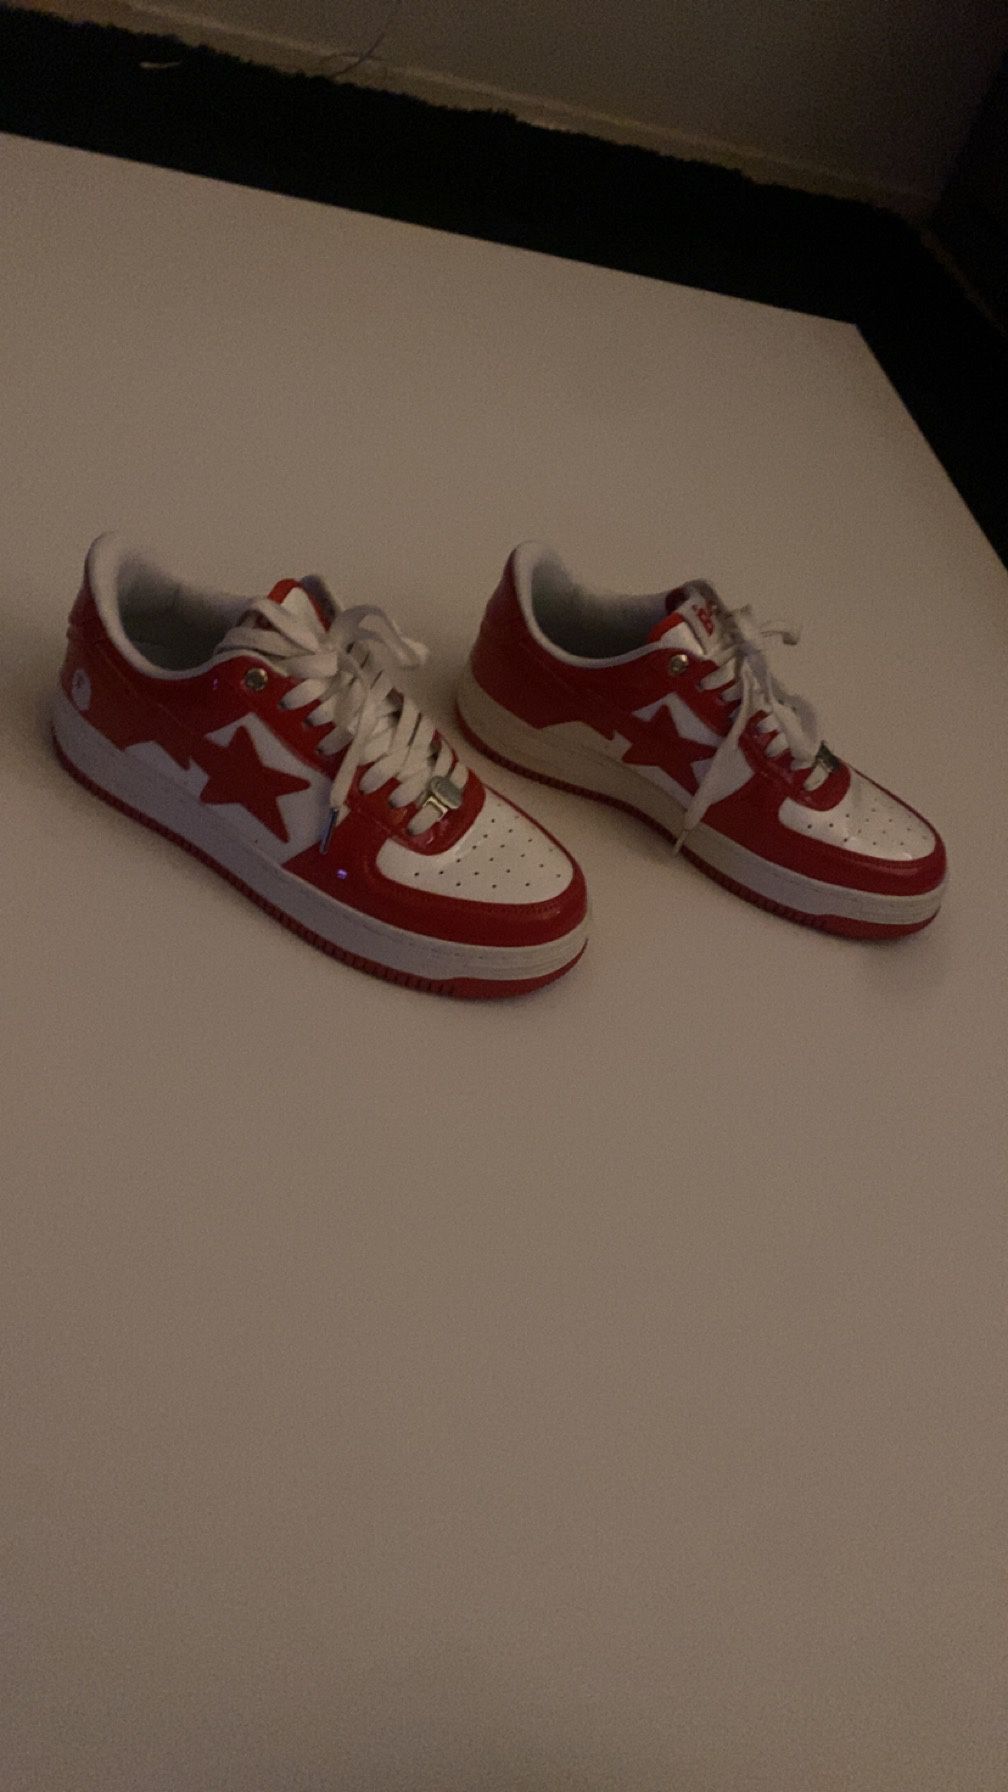 Bape Sta (Patent Leather White Red)